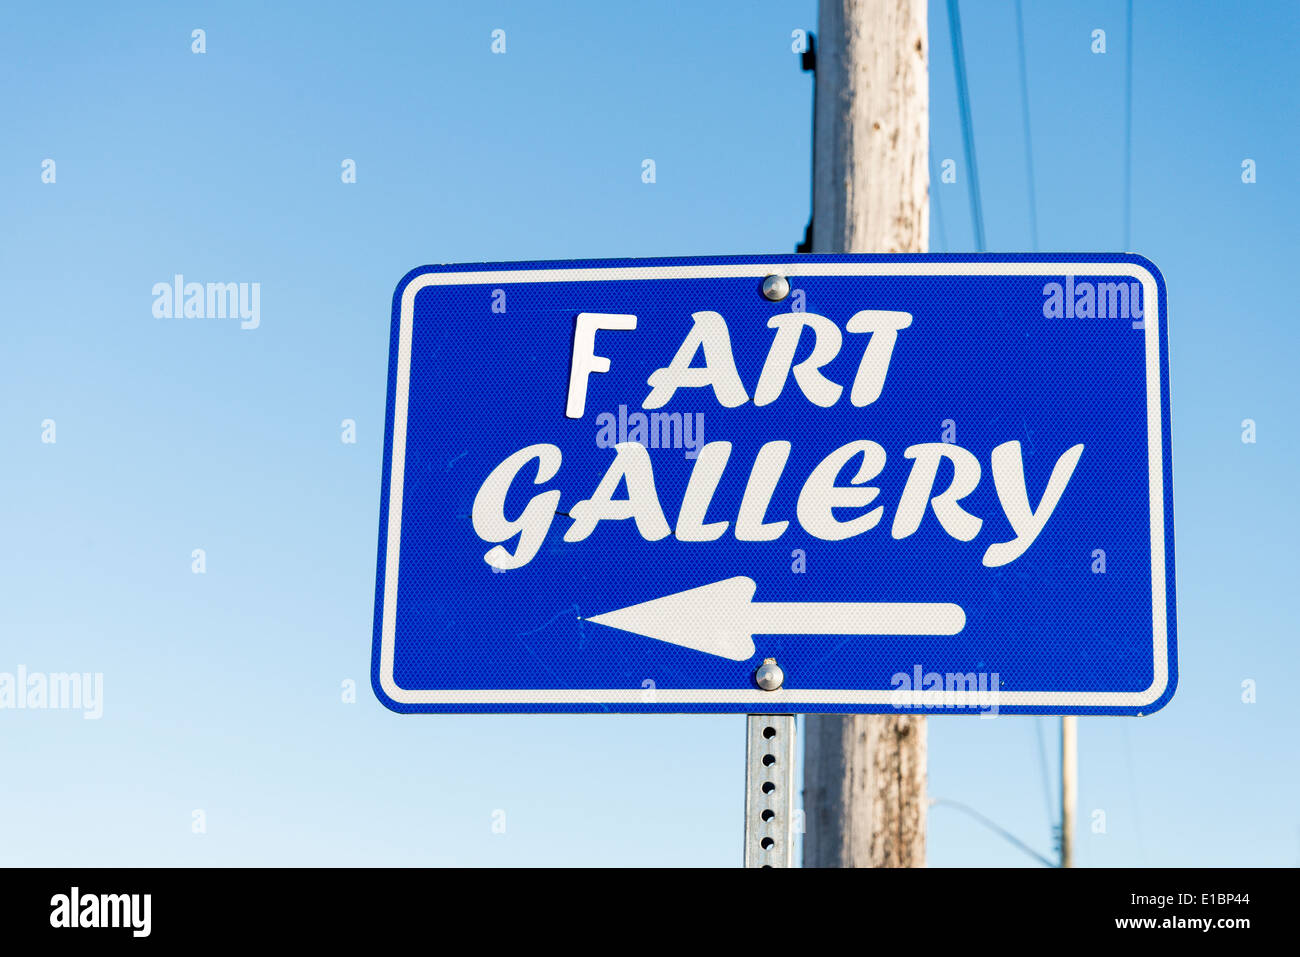 Art changed to fart gallery sign Stock Photo